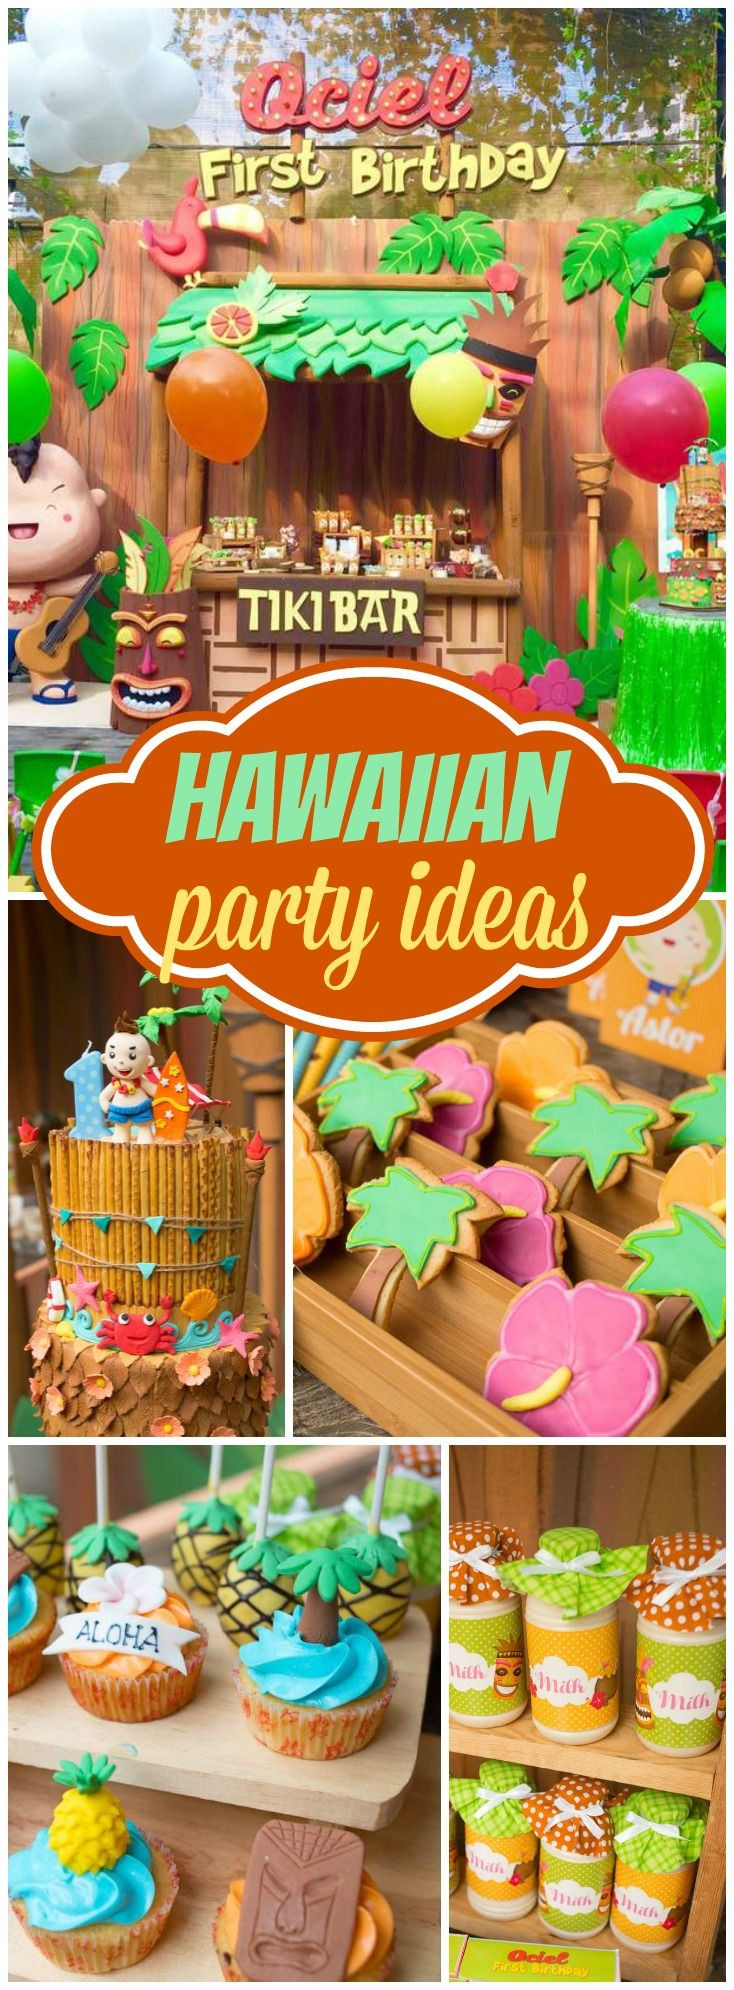 Hawaiian Beach Party Ideas
 You have to see this Hawaiian luau party See more party